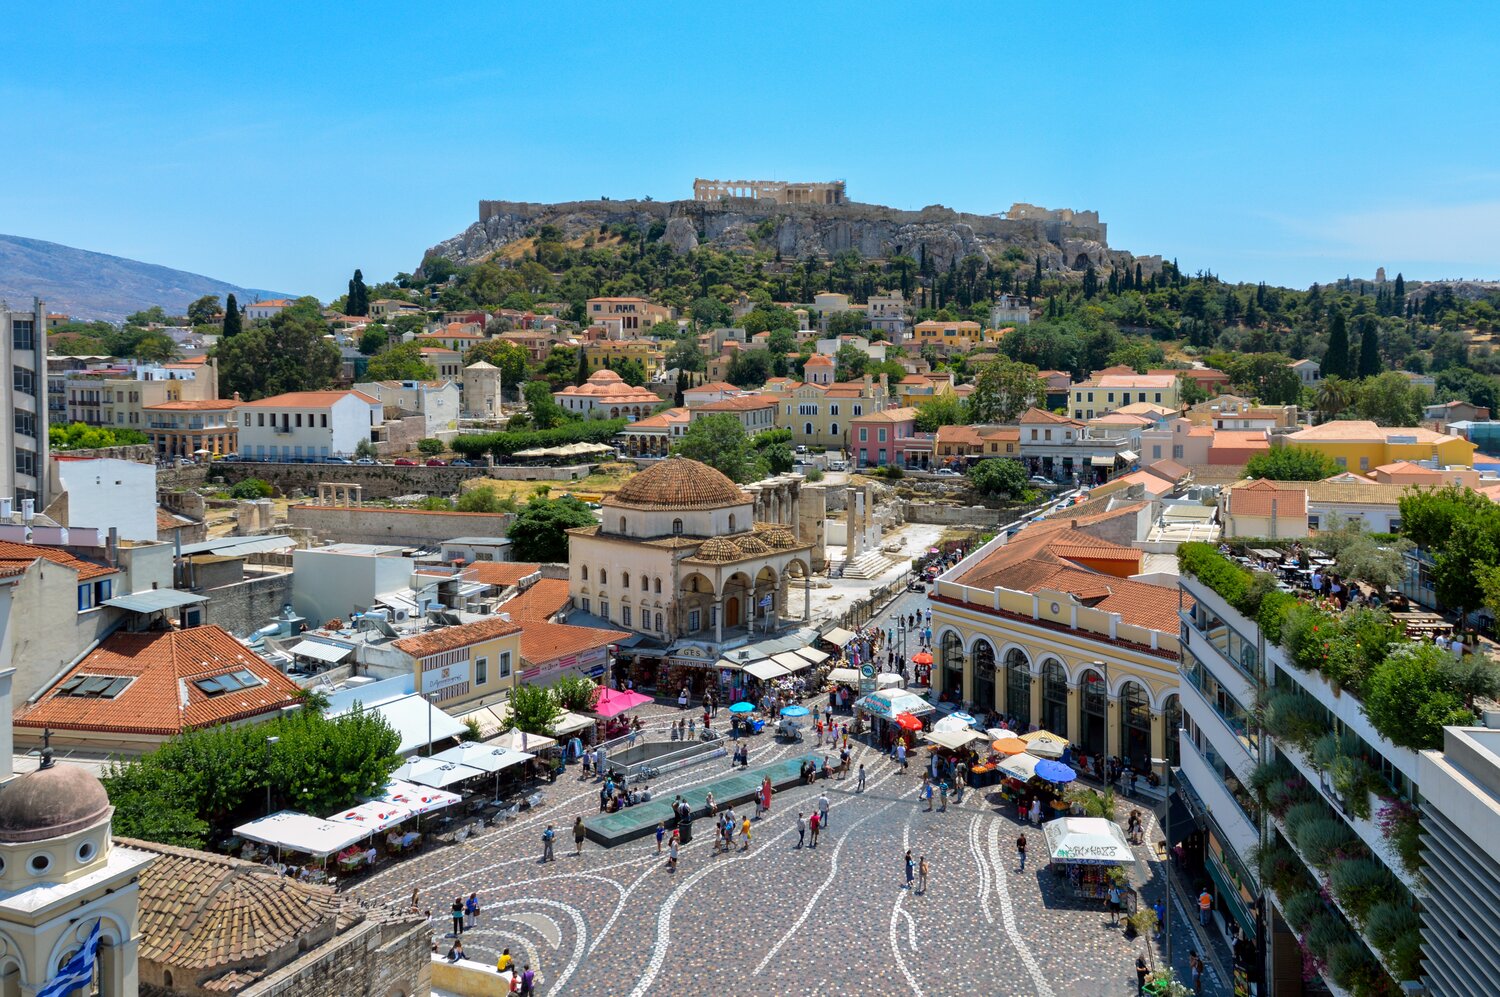 The large shopping agora called Monastiraki is a few blocks away from the Parthenon and Acropolis in the neighborhood of Theseio, where the Kalogerinis family stays. Photo by Starcevic via Canva